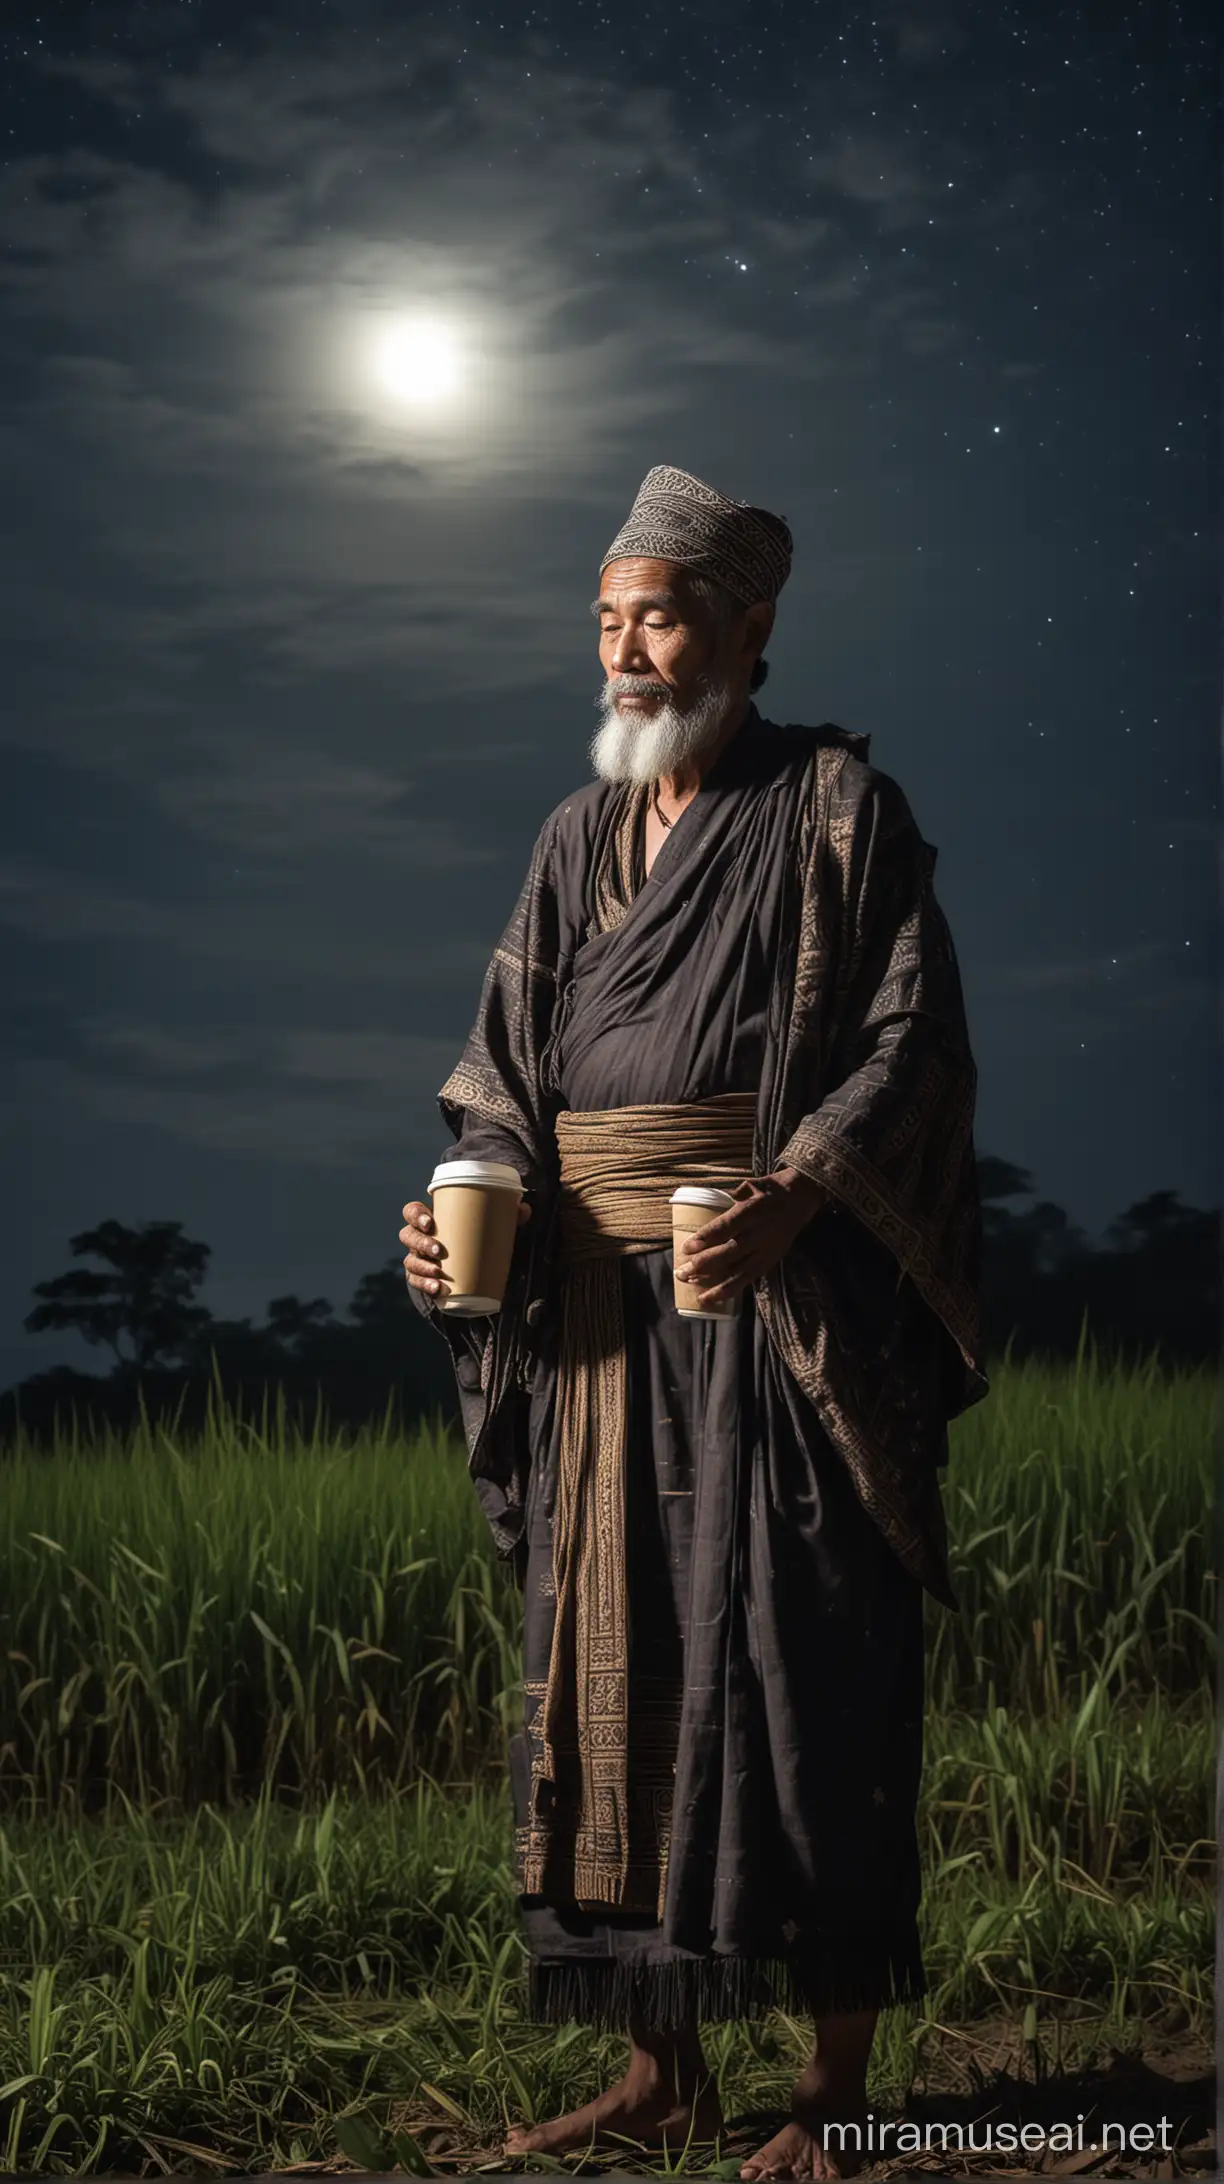 Man in Traditional Attire Contemplating Under Starry Night Sky While Sipping Coffee